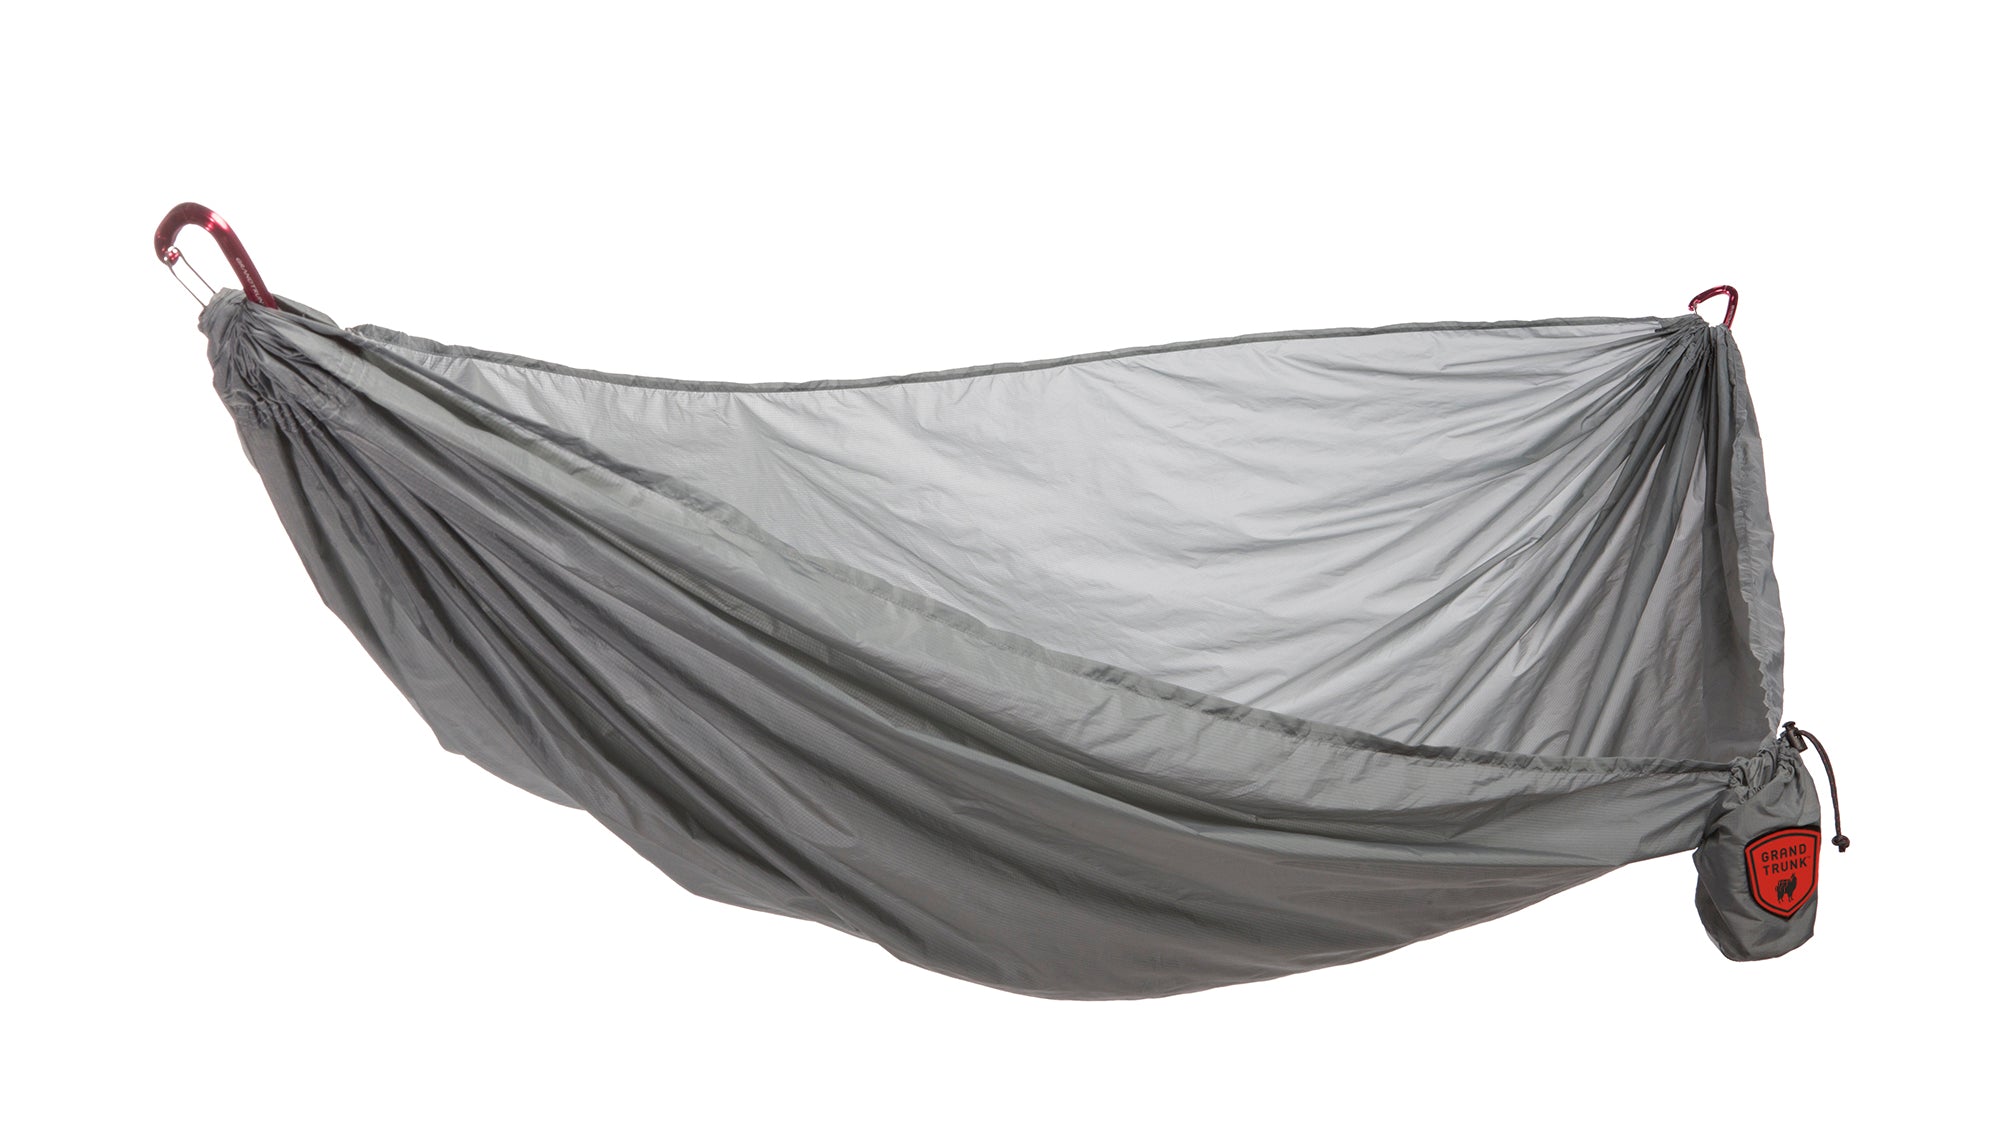 Quality Gear Grand Trunk Nano Hammock by Outdoor Outfitter Finds